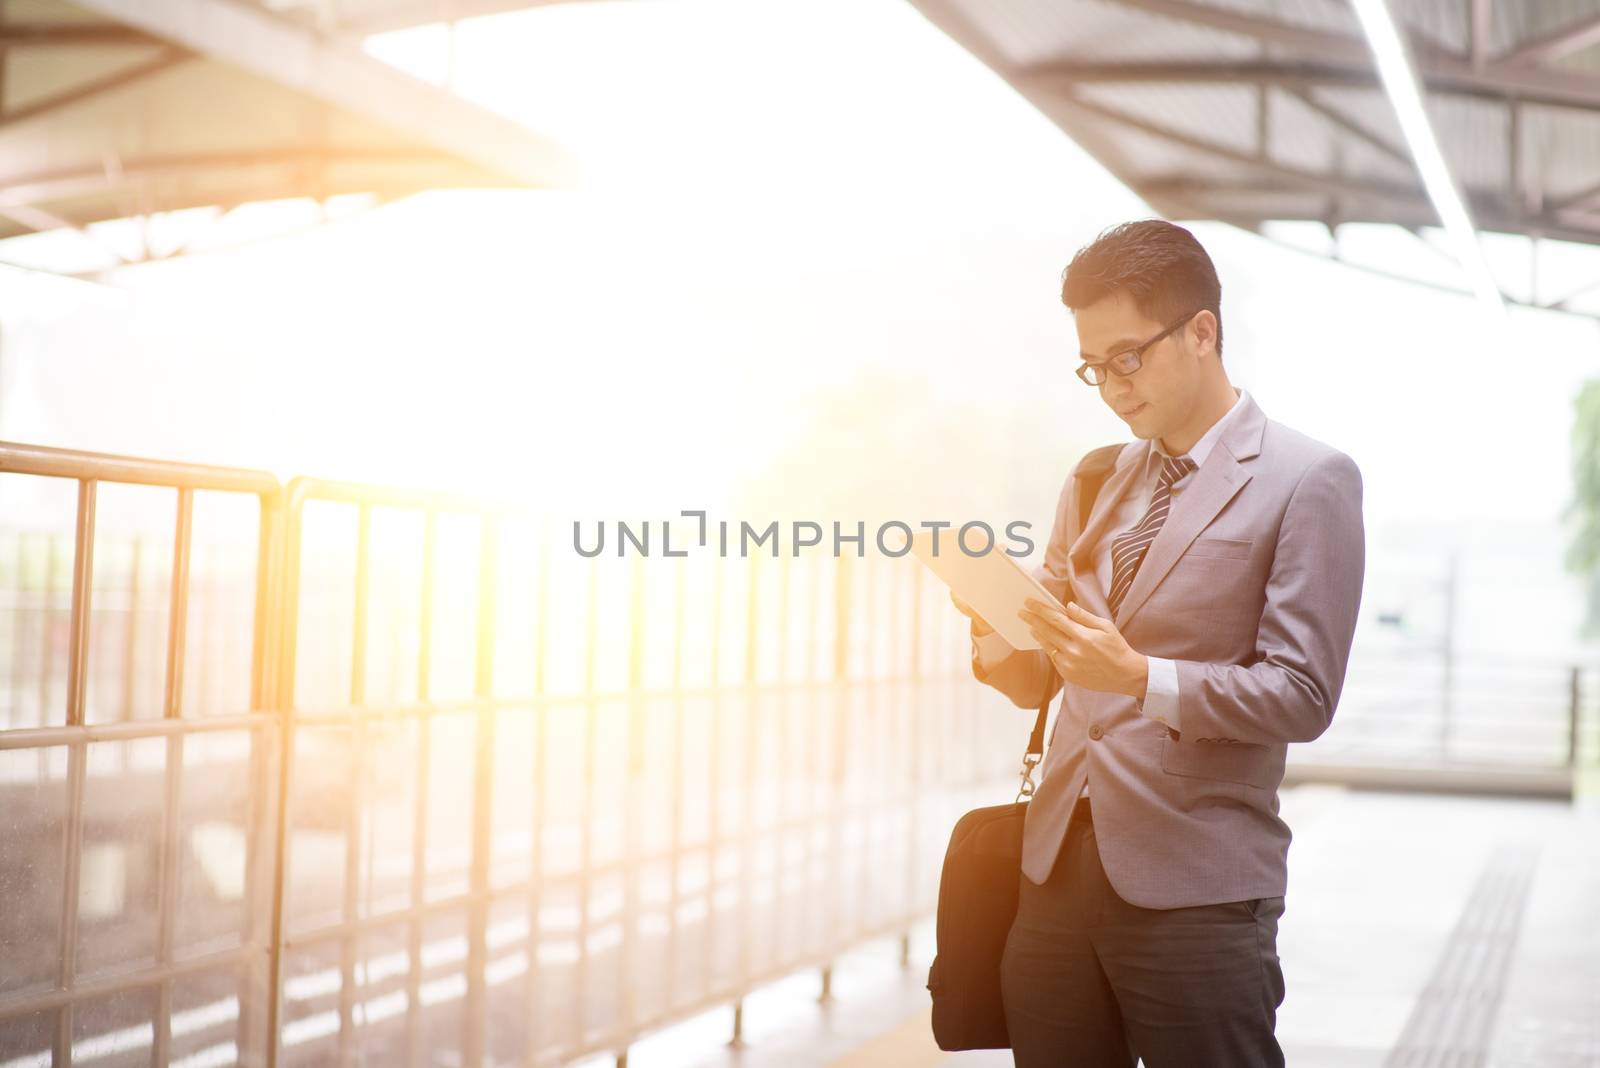 Asian businessman using digital tablet pc at railway platform, with beautiful sun flare at background.